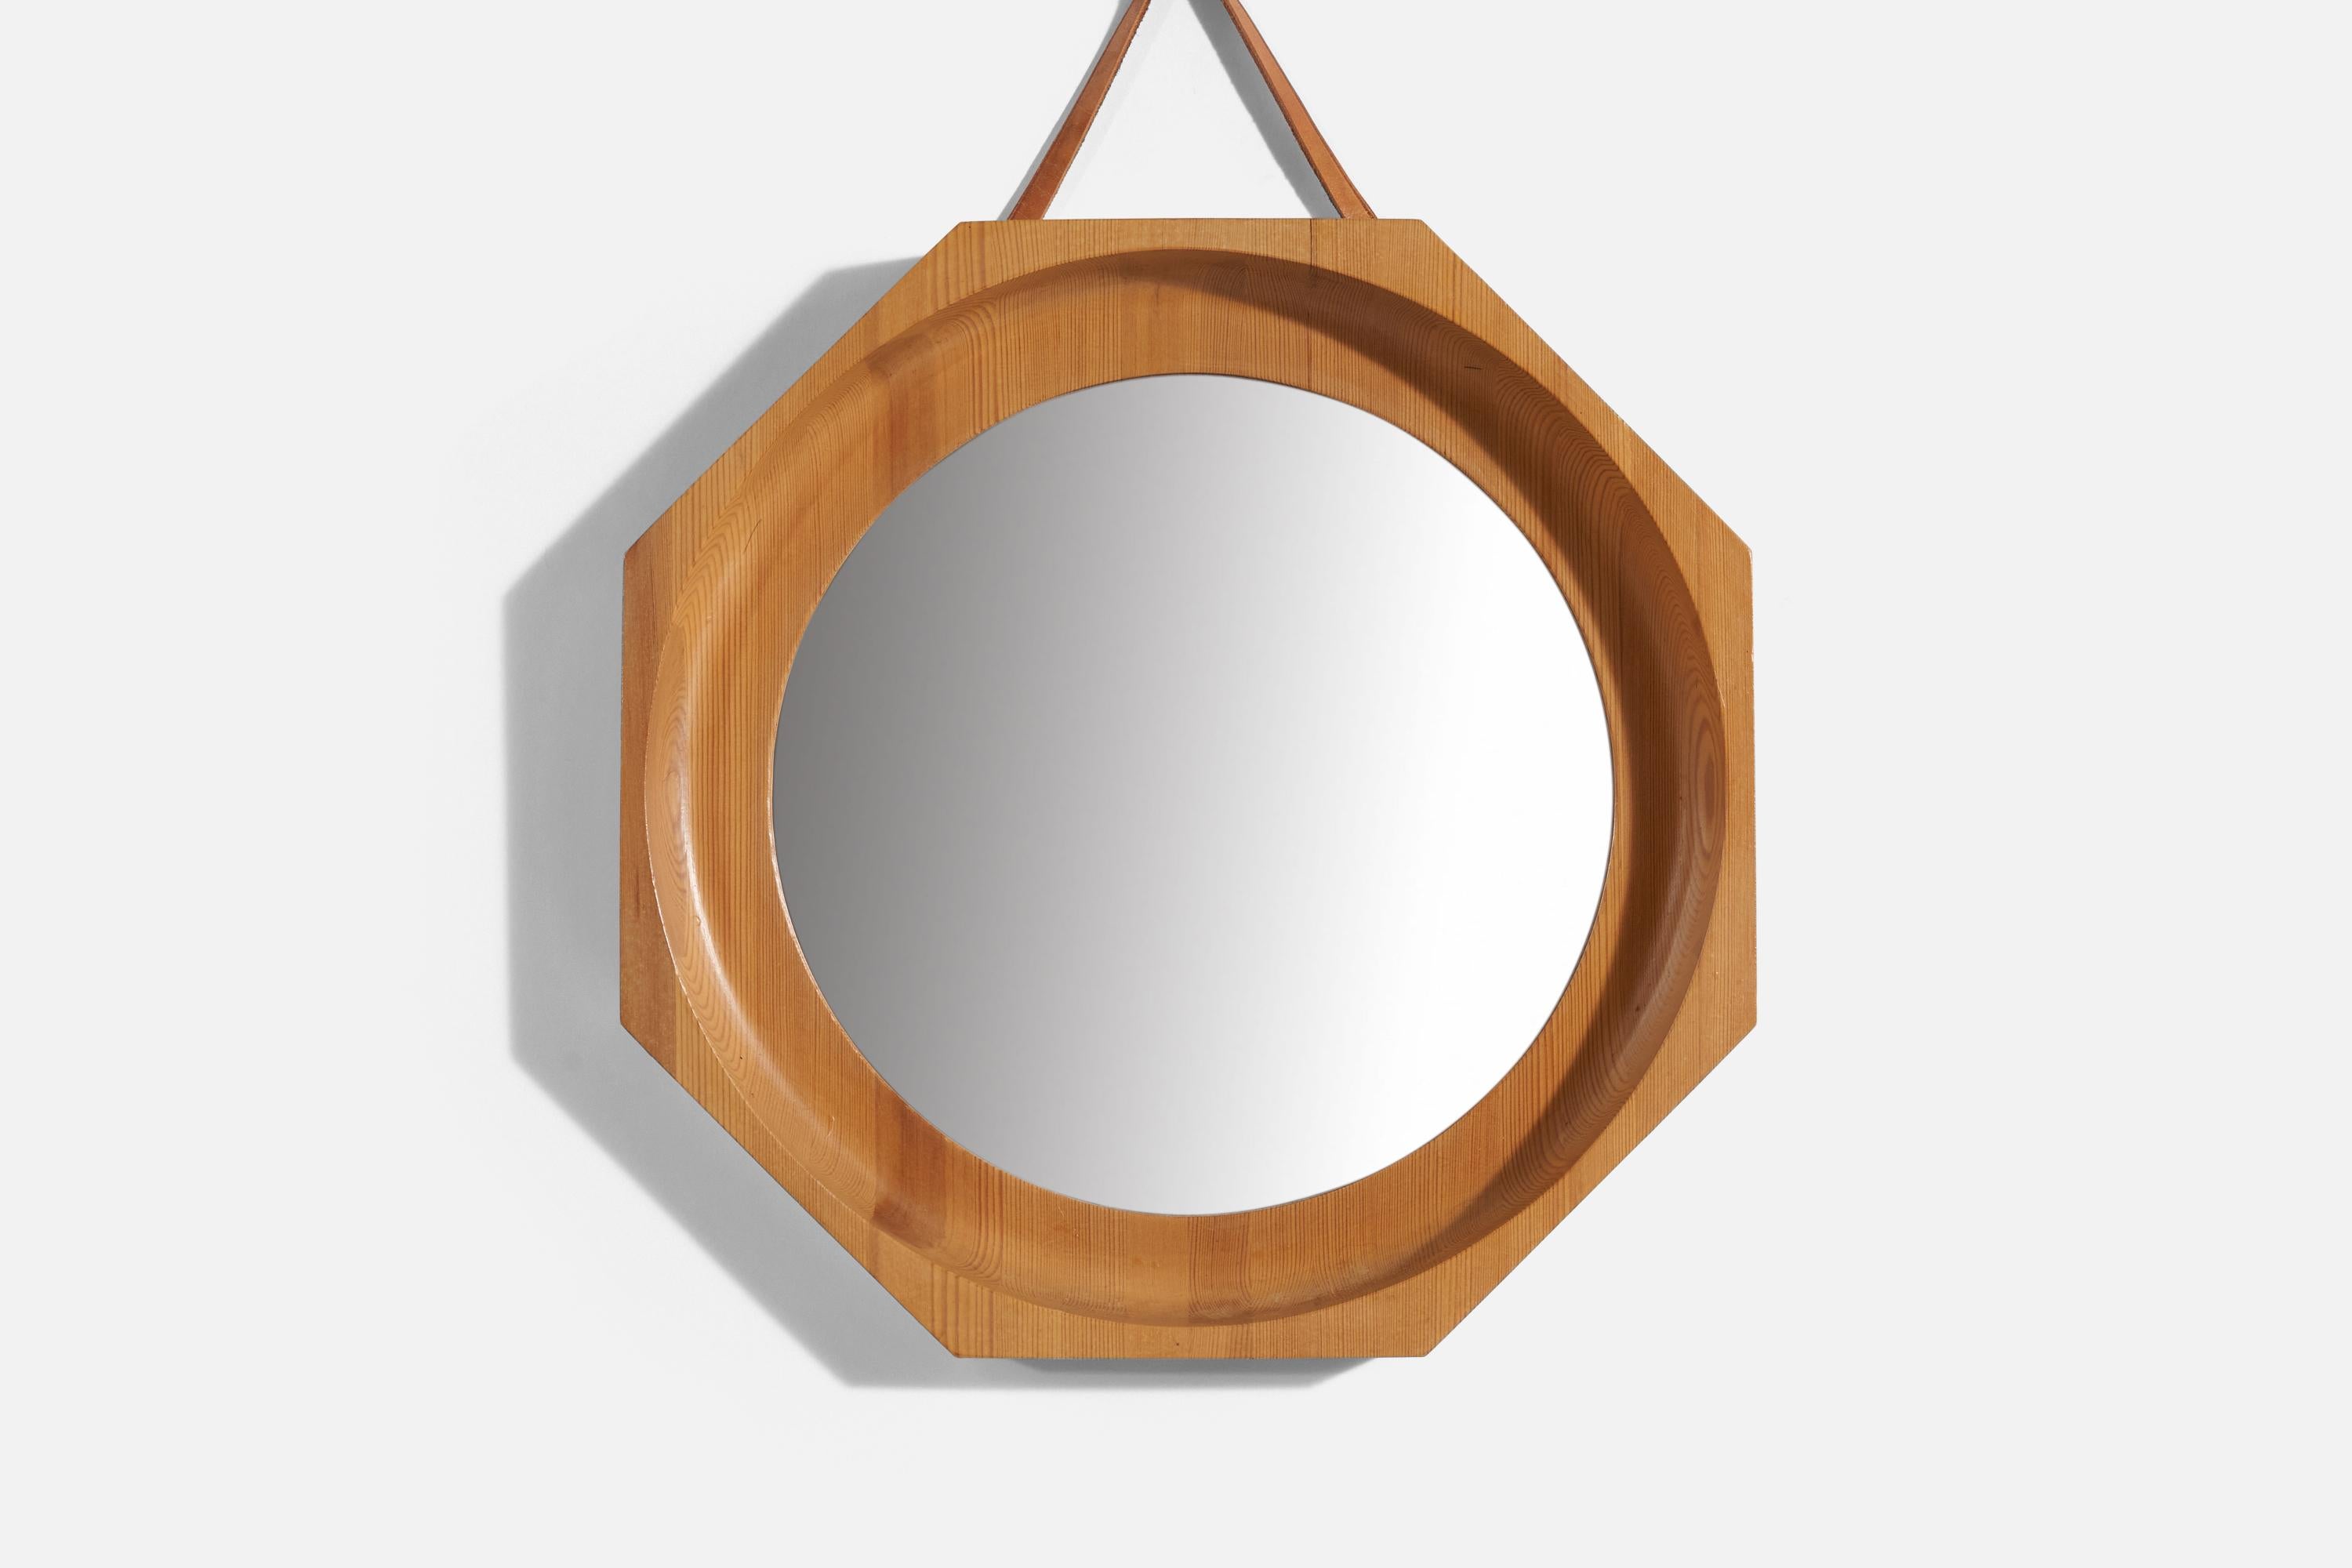 Mid-20th Century Swedish Designer, Wall Mirror, Pine Wood, Leather, Mirror, Sweden, 1940s For Sale